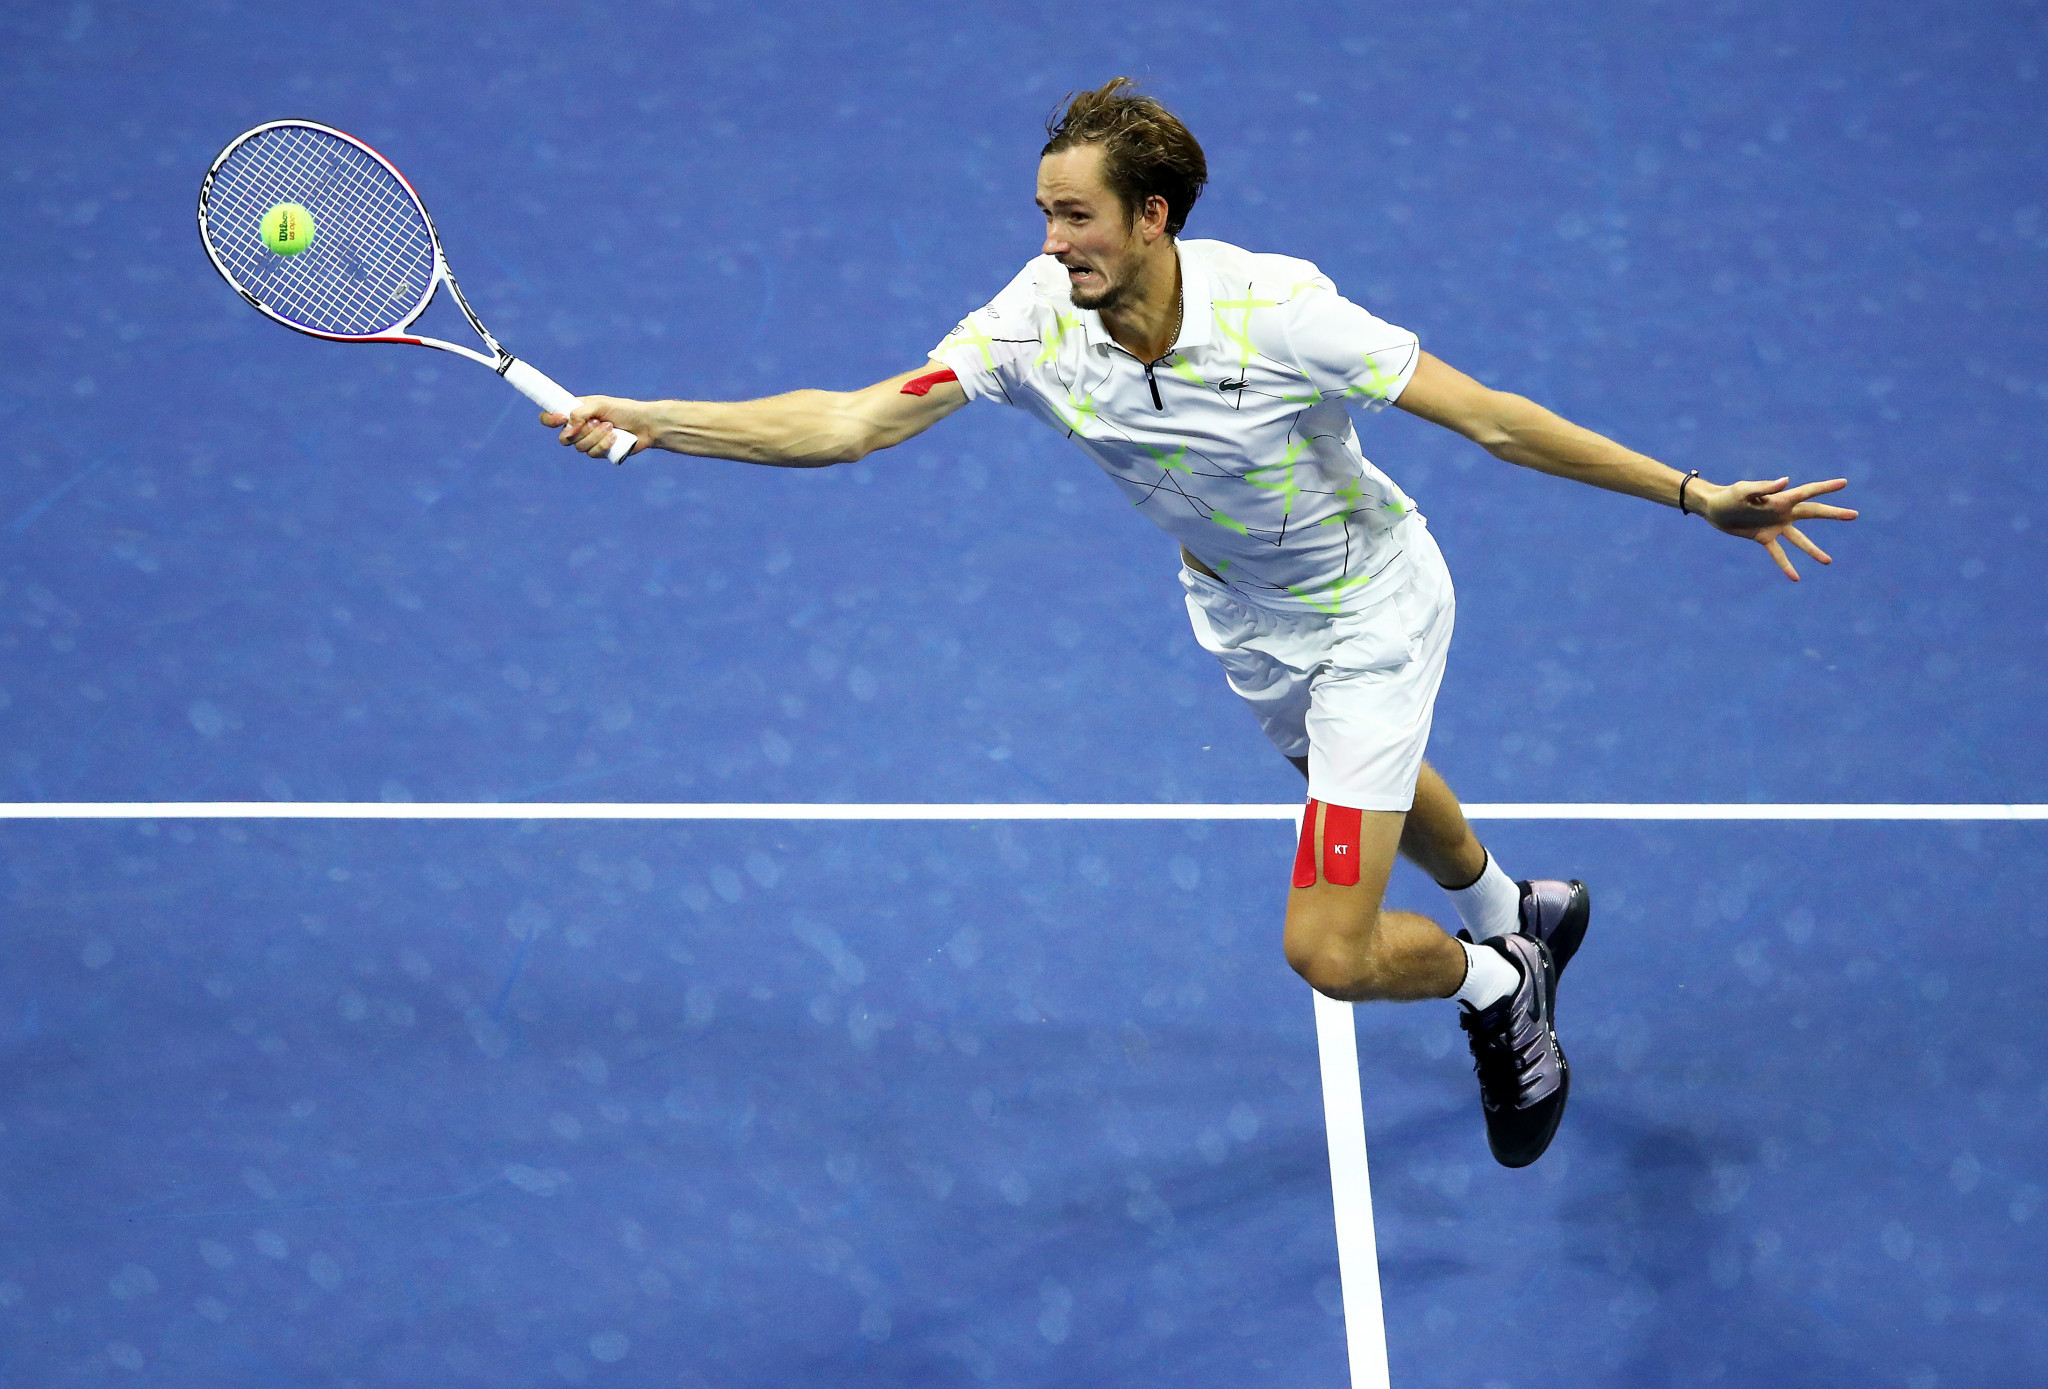 Last year's men's runner-up Daniil Medvedev of Russia secured a straight sets win during the night session on day two ©Getty Images